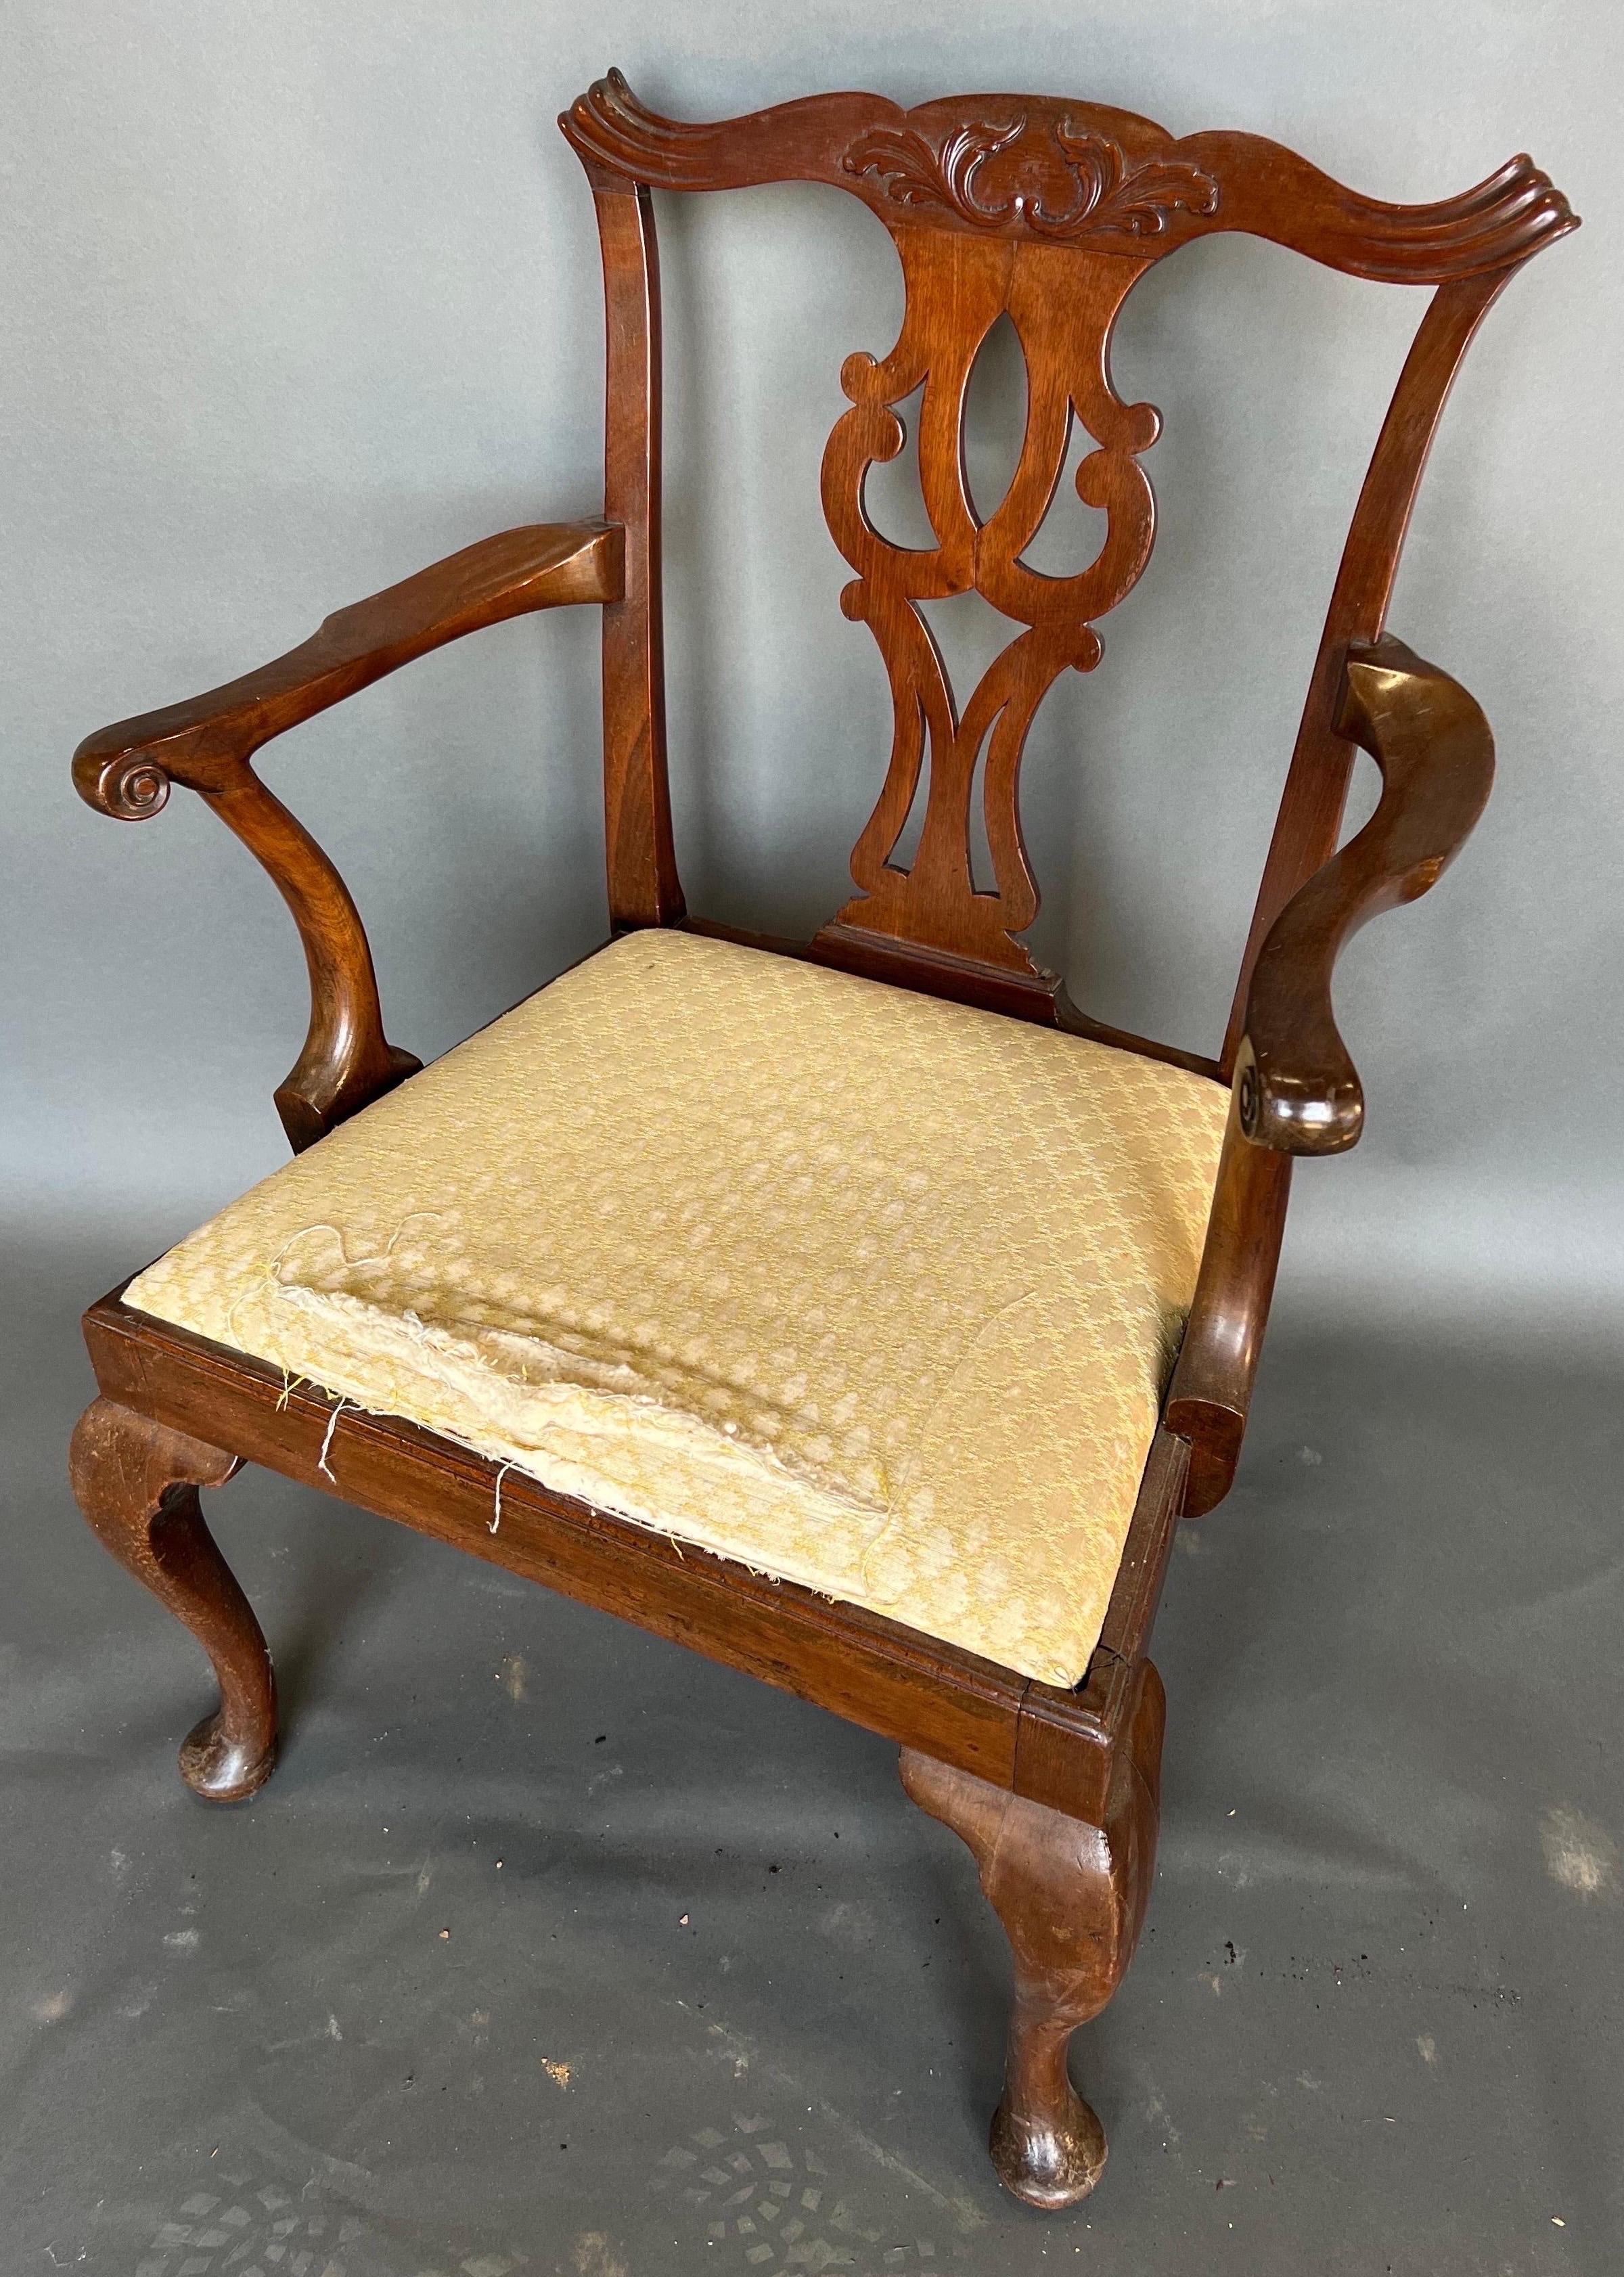 Fine 18th century Georgian mahogany armchair with original slip seat. Nice, comfortable proportions with elegant back splat and ears. Slip seat is ready for reupholstering in any fabric you like.